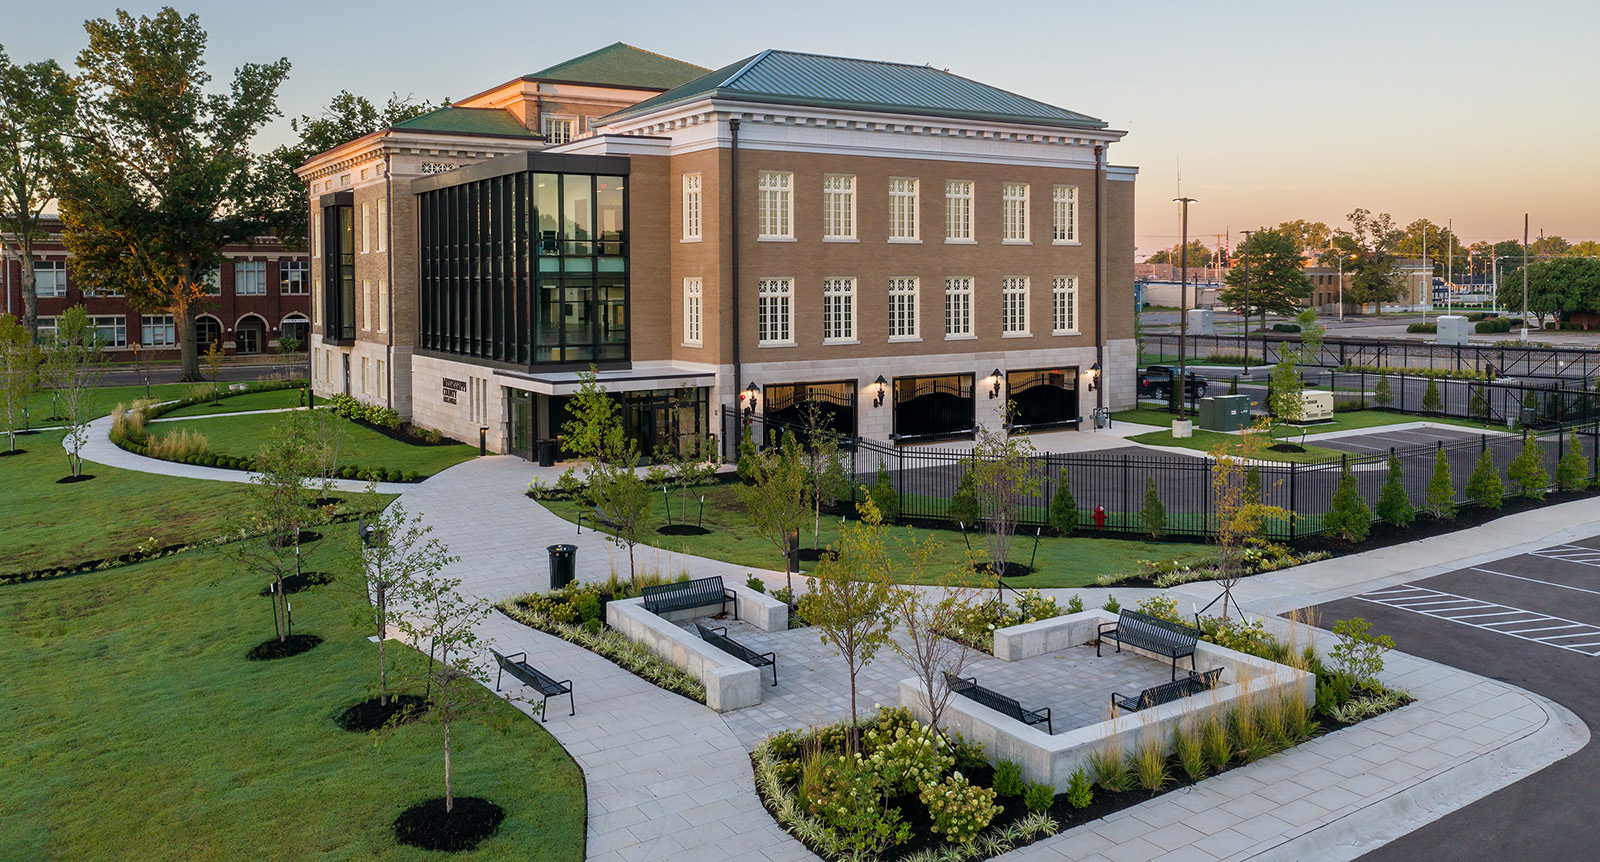 Preserve Arkansas Award for Outstanding New Construction in a Historic Setting